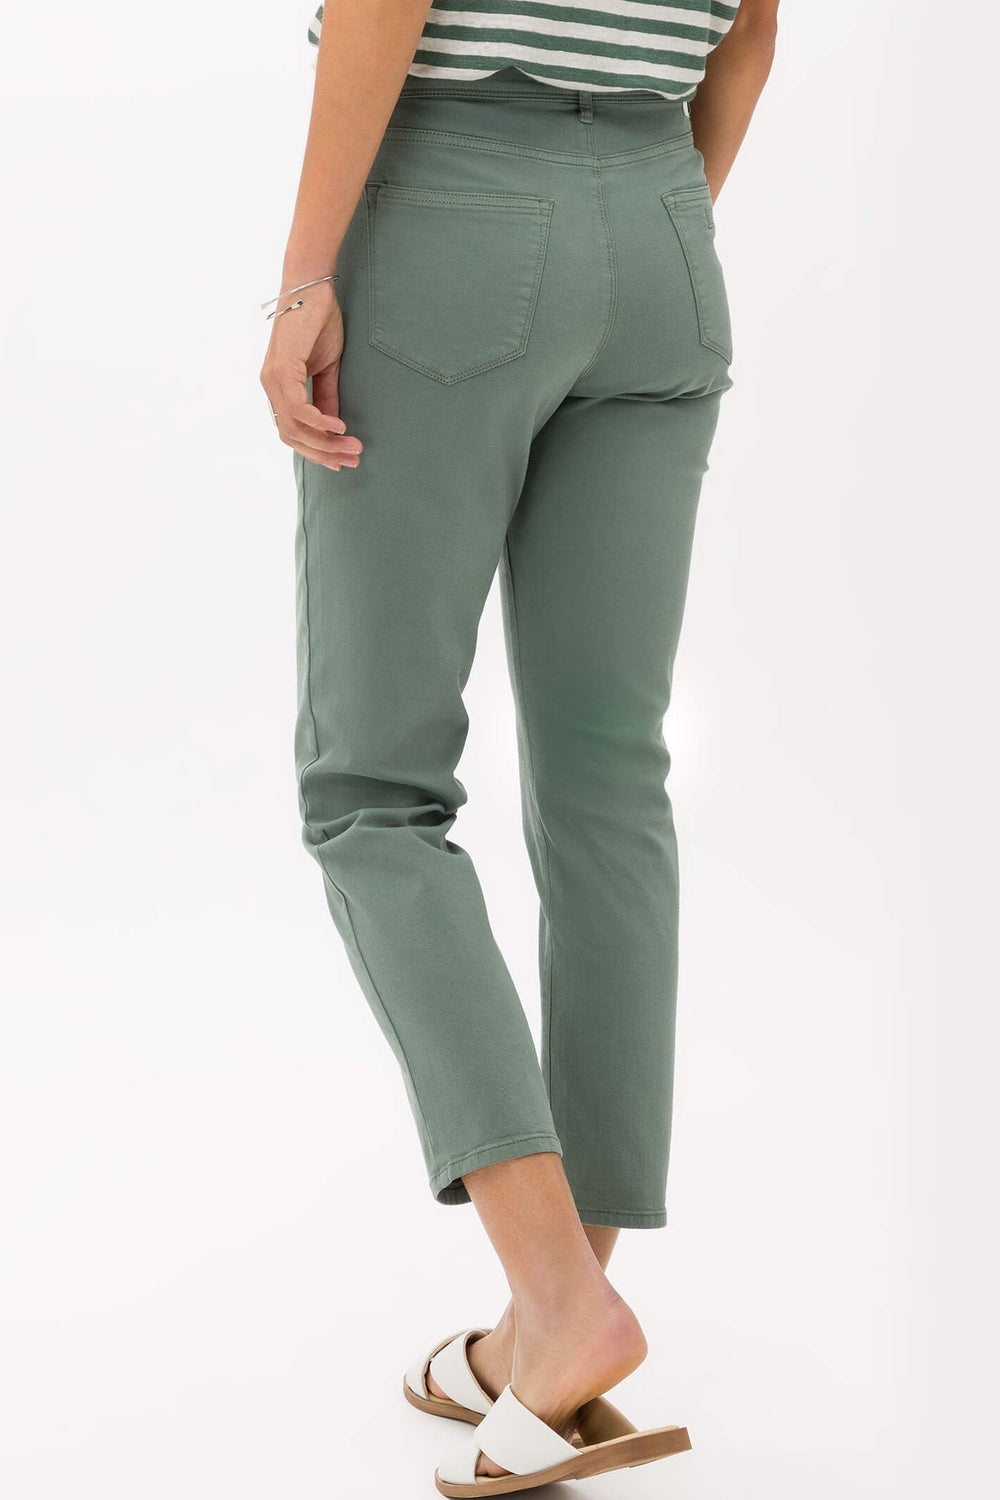 Brax Mary S 71-7558 35 Mary S Agava Green Ultra Light Slim Fit Jeans - Shirley Allum Boutique